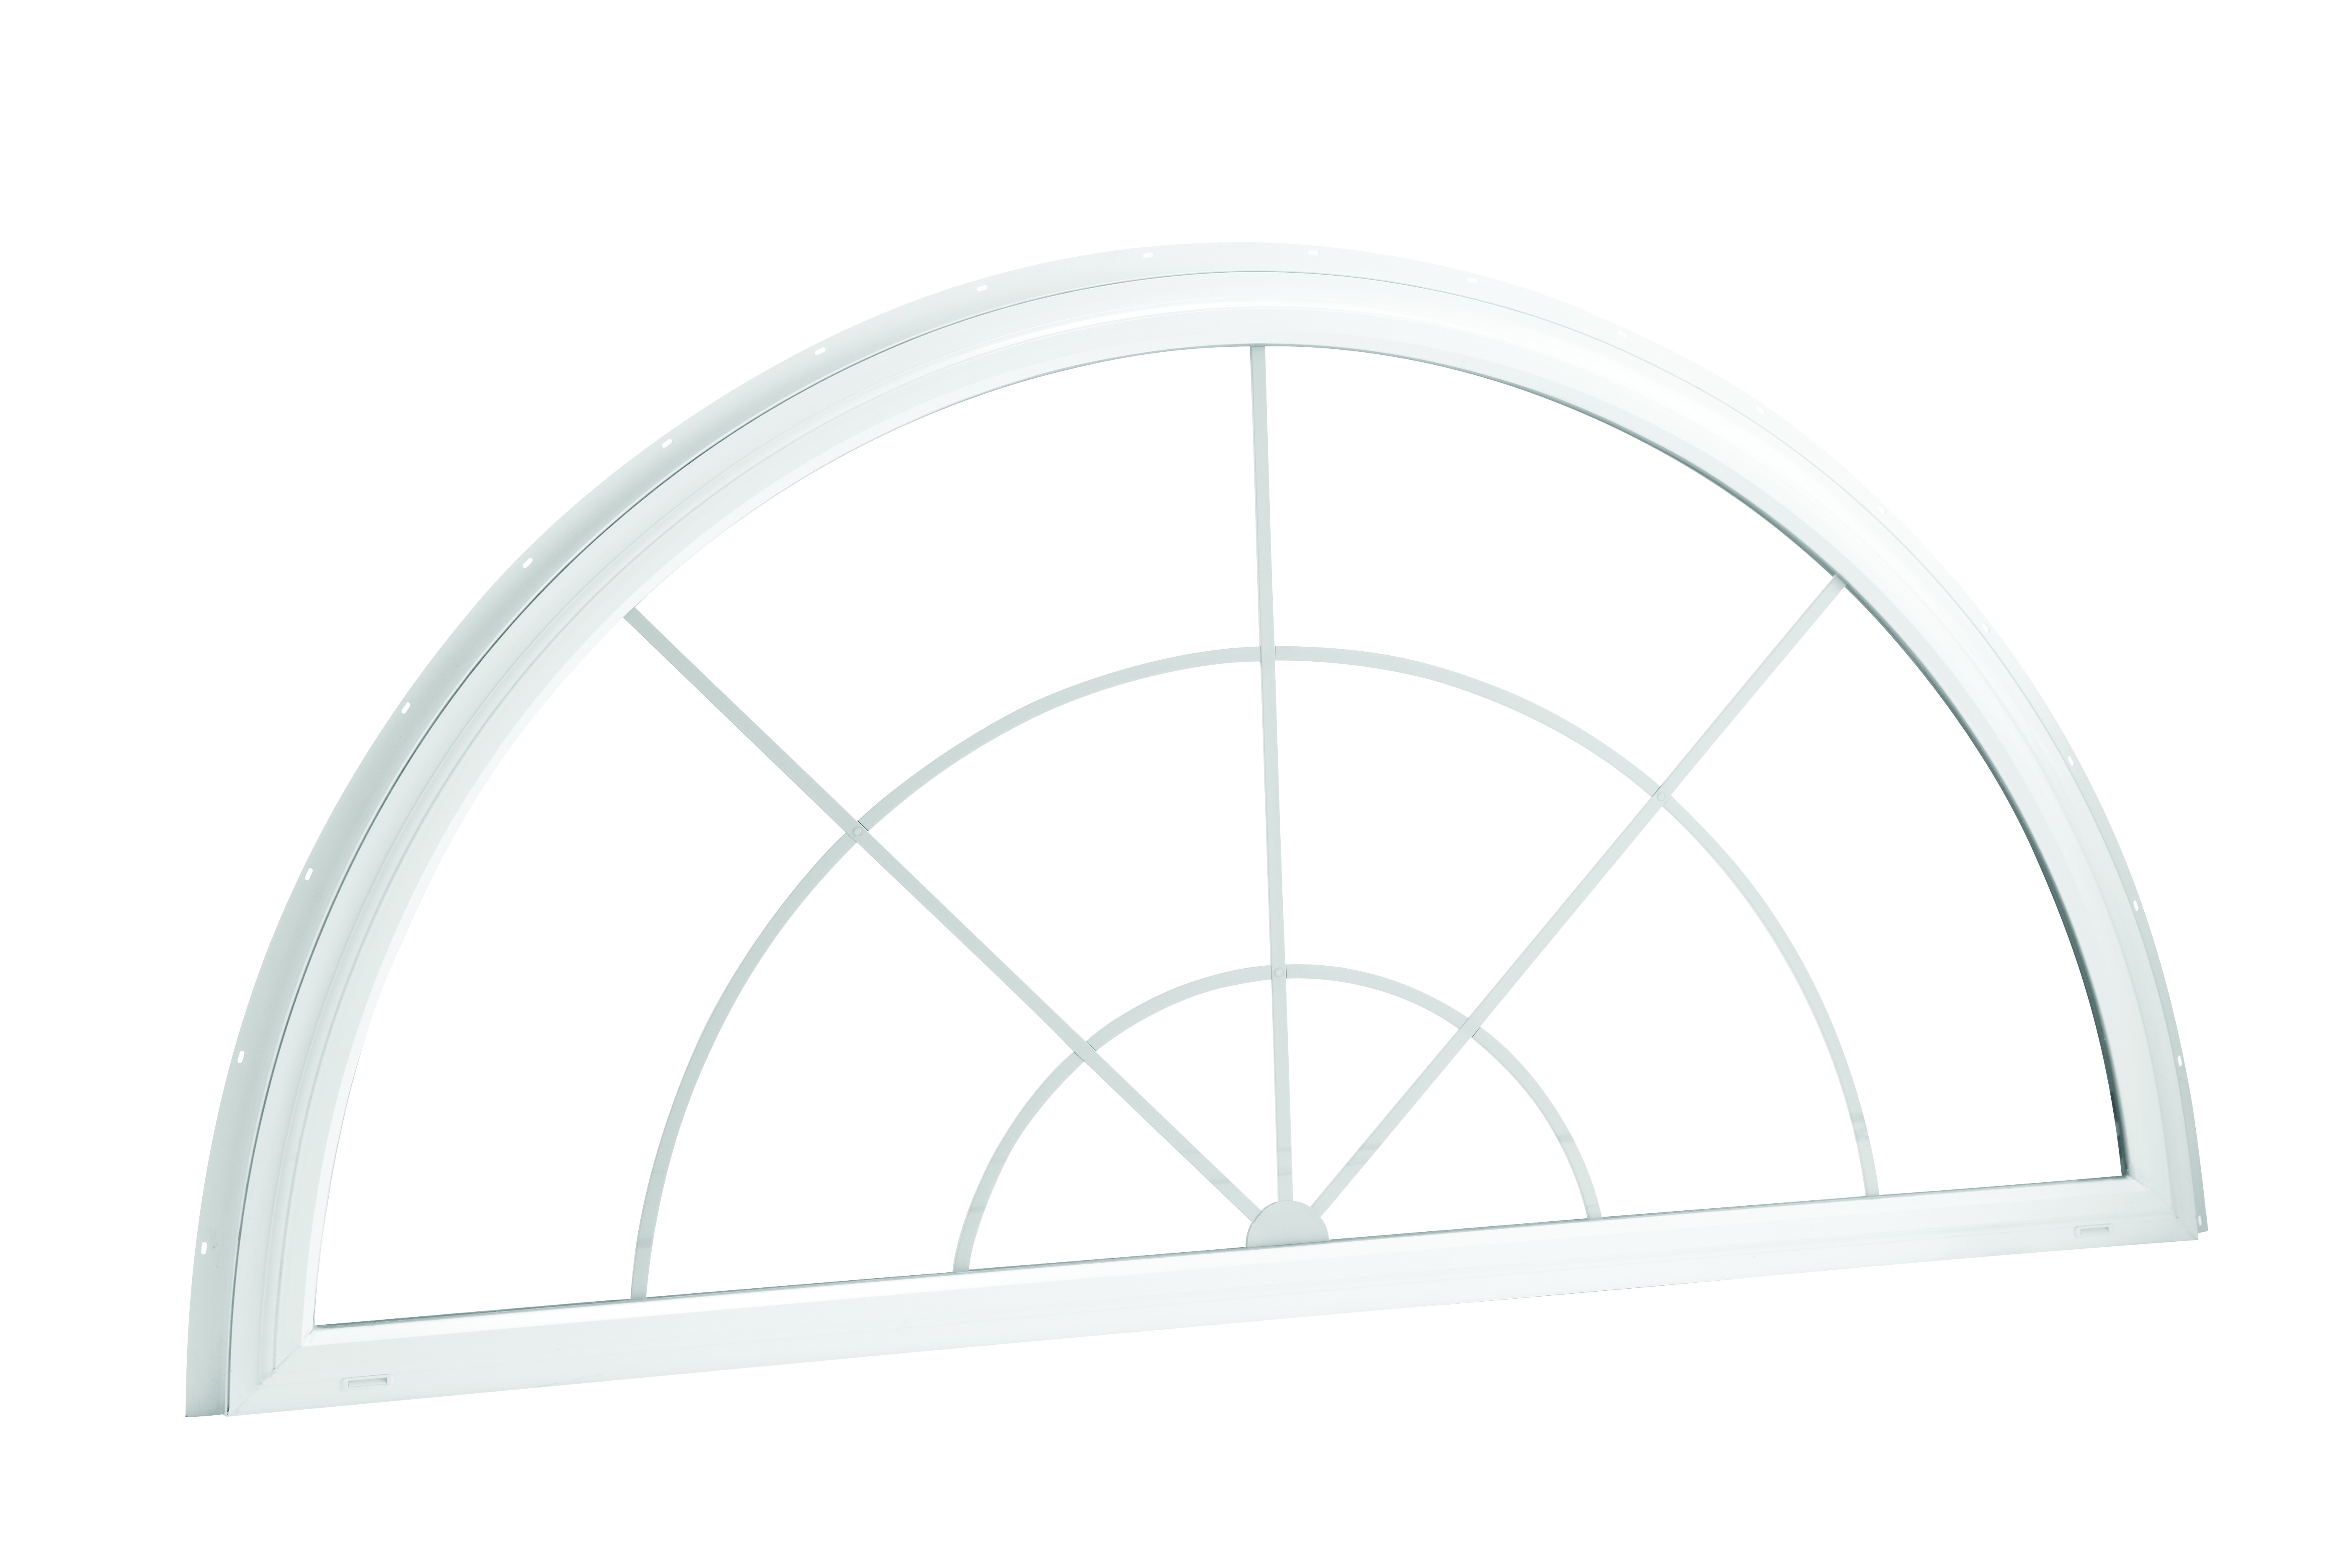 Isolated shot of Advantage Semi-Circle Special Shaped window